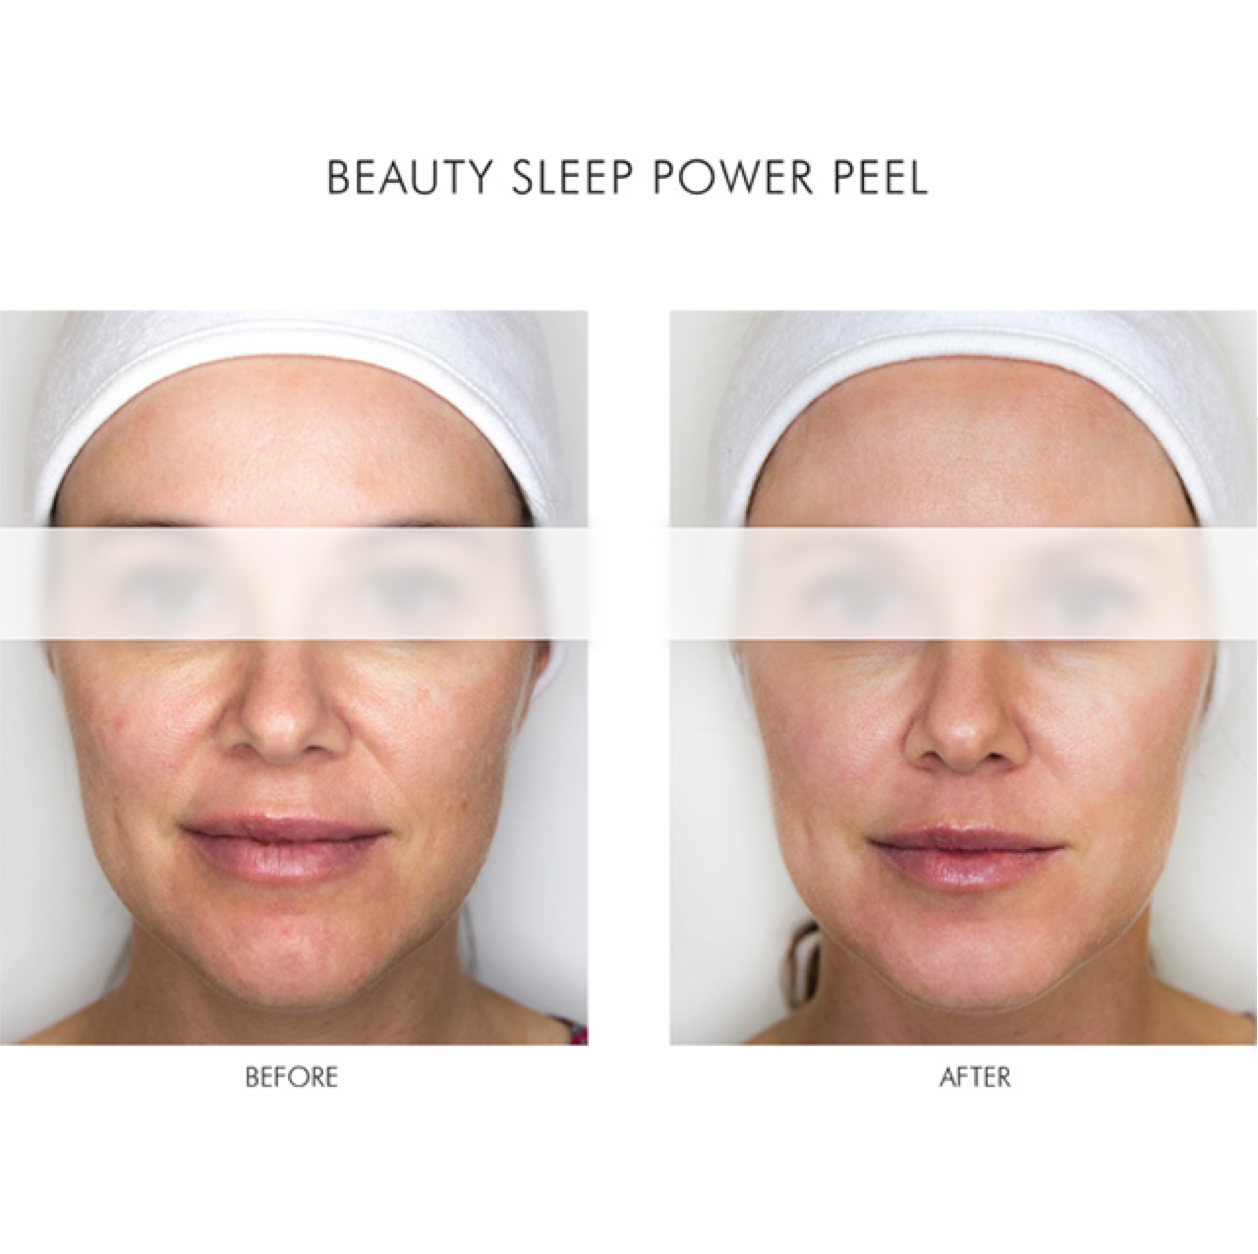 Alpha-H Beauty Sleep Power Peel Before and After